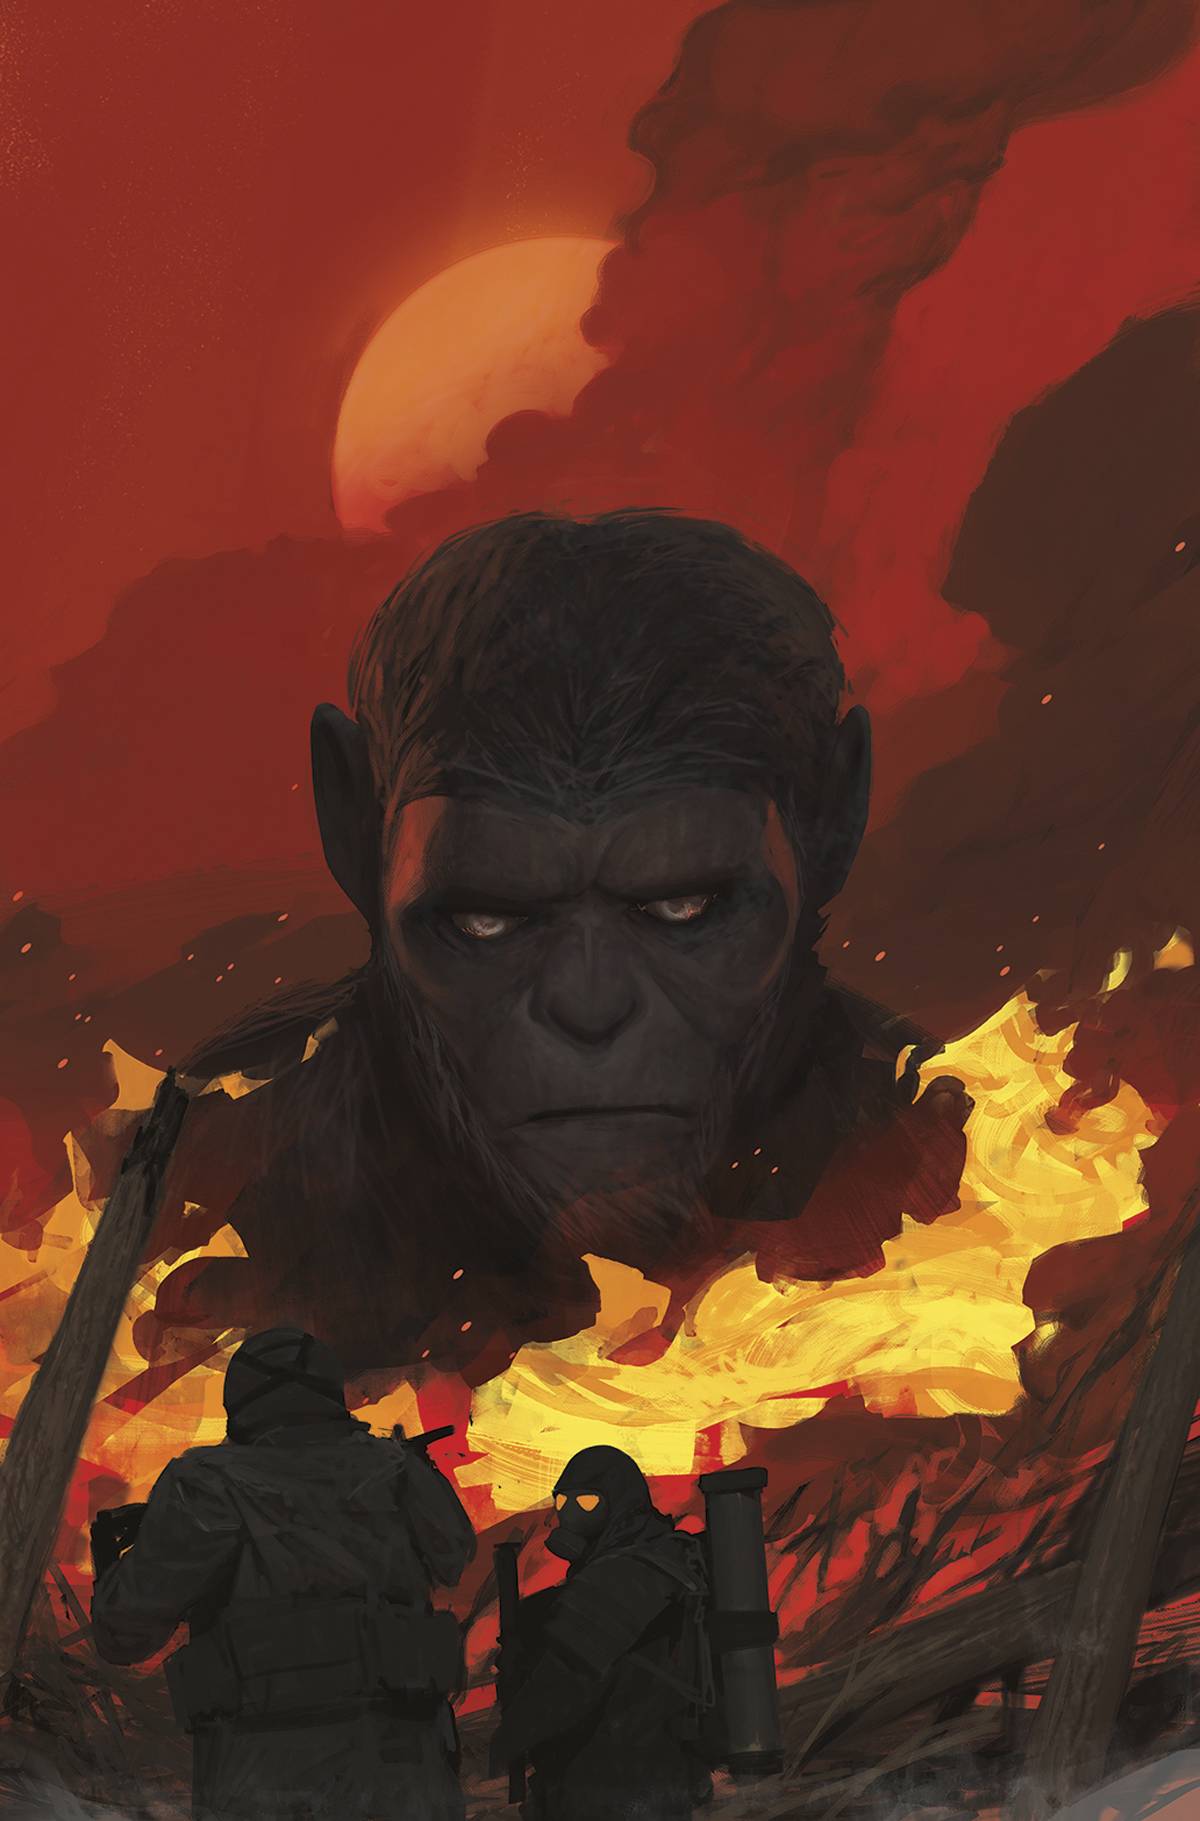 WAR FOR THE PLANET OF THE APES#2